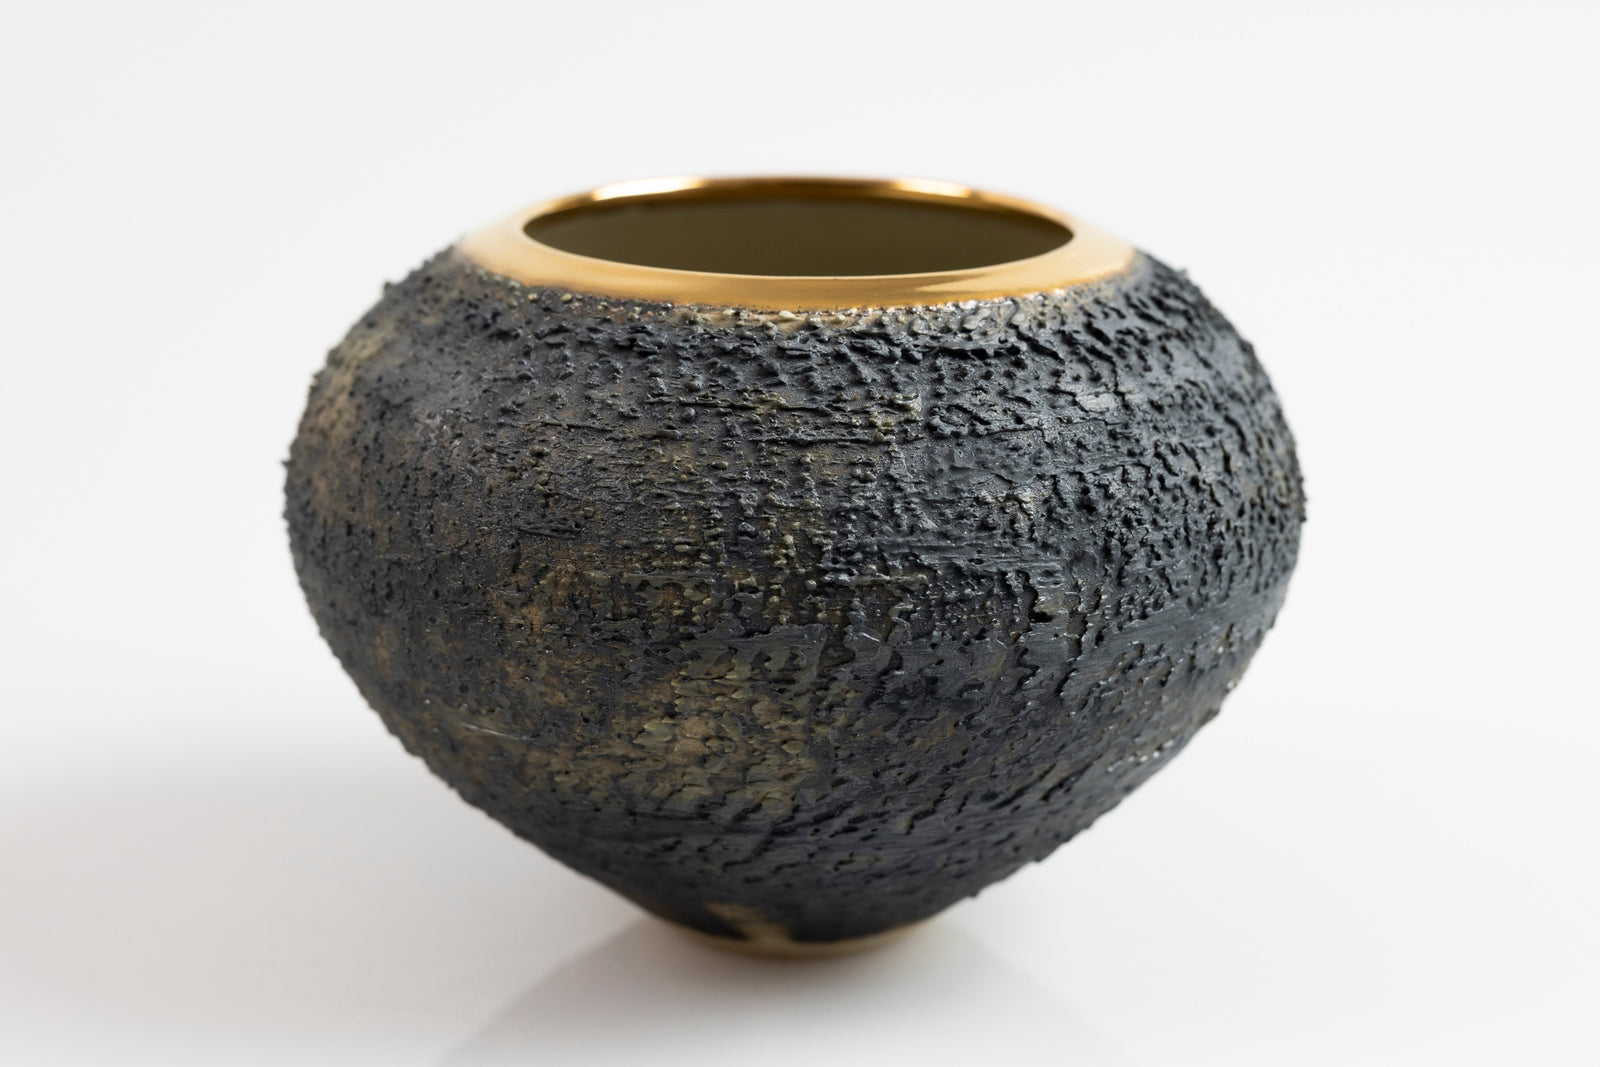 Textured vase with gold lustre rim, by Alex McCarthy, available at Padstow Gallery, Cornwall